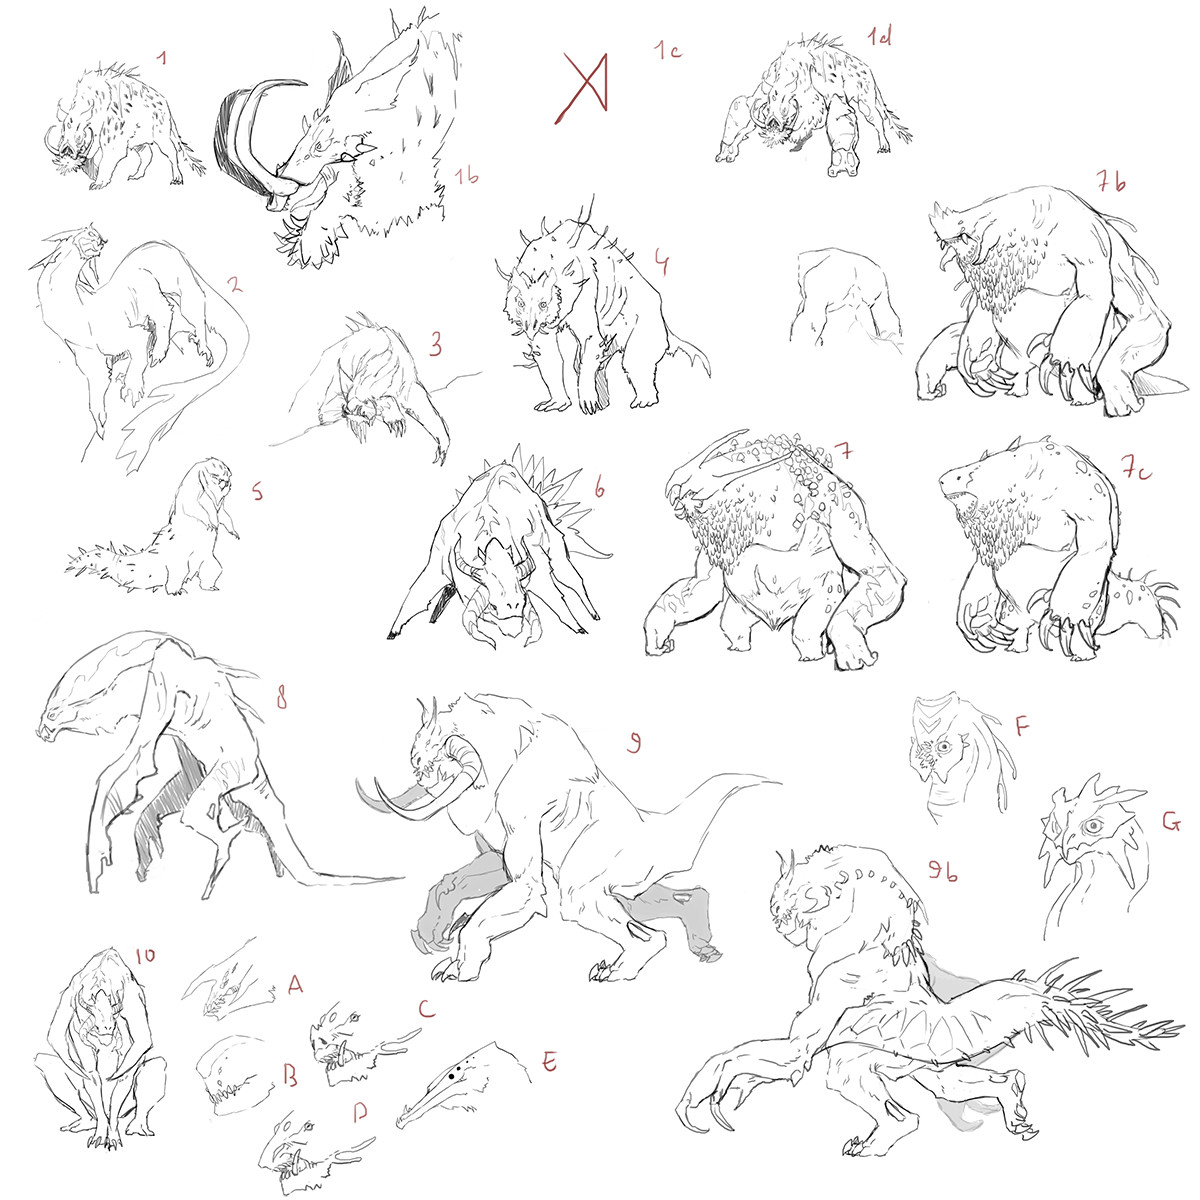 first sketches for the monster design 